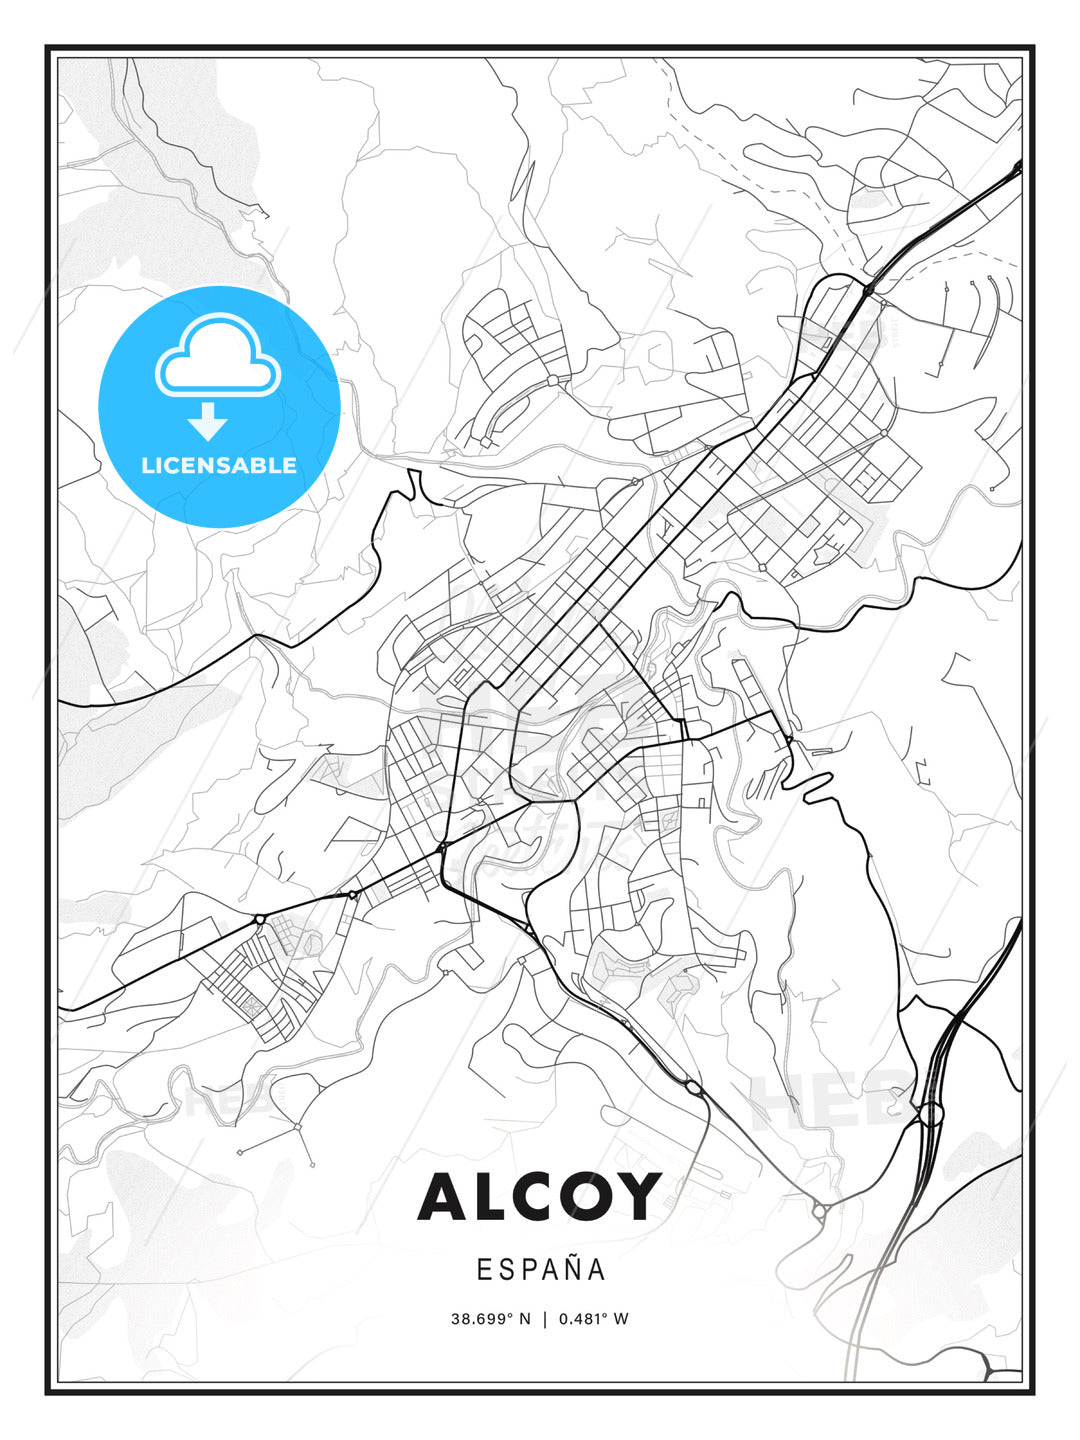 Alcoy, Spain, Modern Print Template in Various Formats - HEBSTREITS Sketches